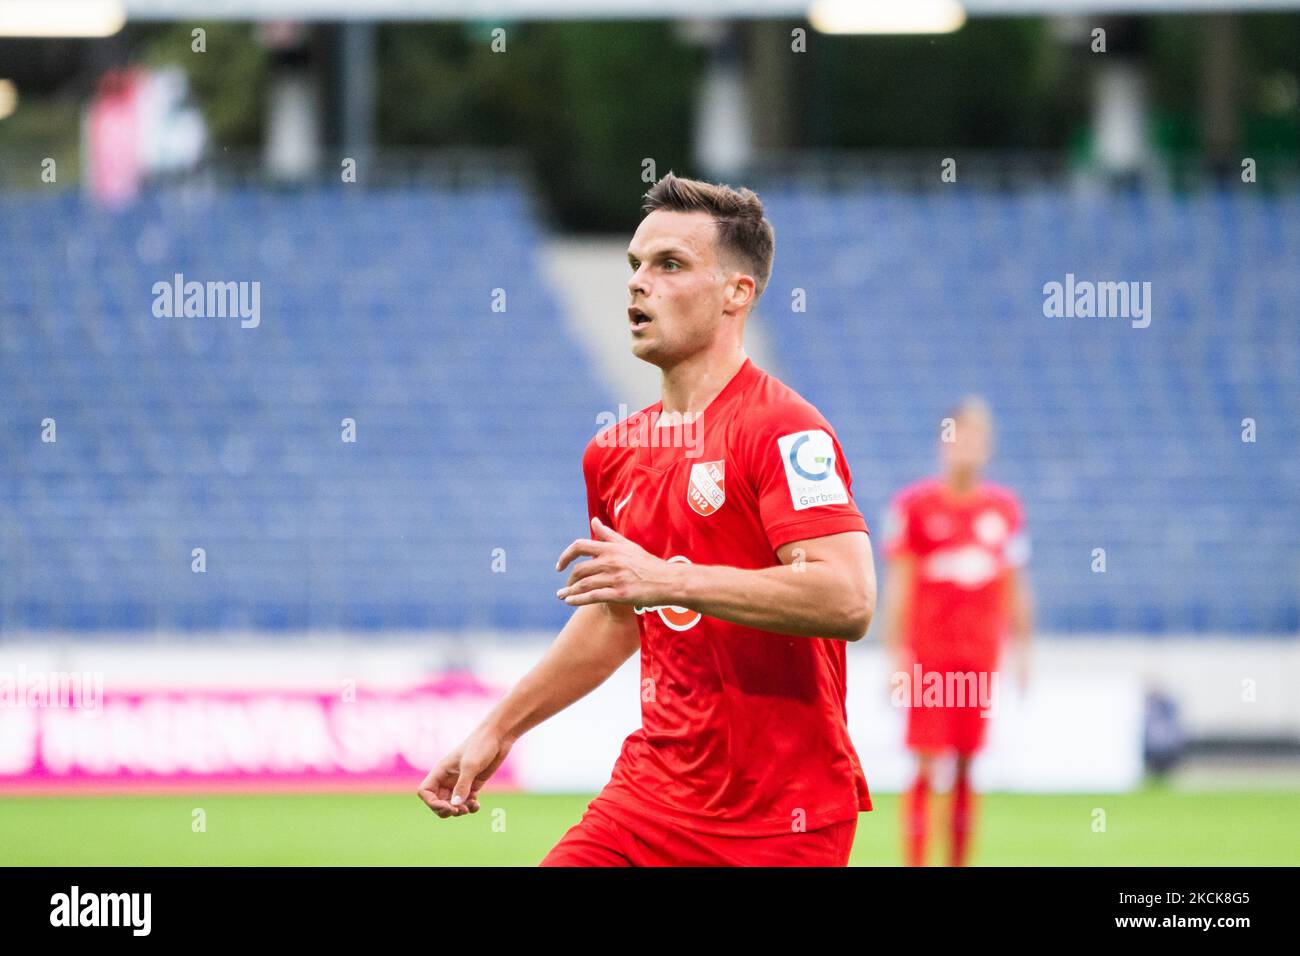 Yannik Jaeschke of havelse looks on during the 3. Liga match between TSV Havelse and Tuerkguecue Muenchen at HDI-Arena on August 25, 2021 in Hanover, Germany. (Photo by Peter Niedung/NurPhoto) Stock Photo